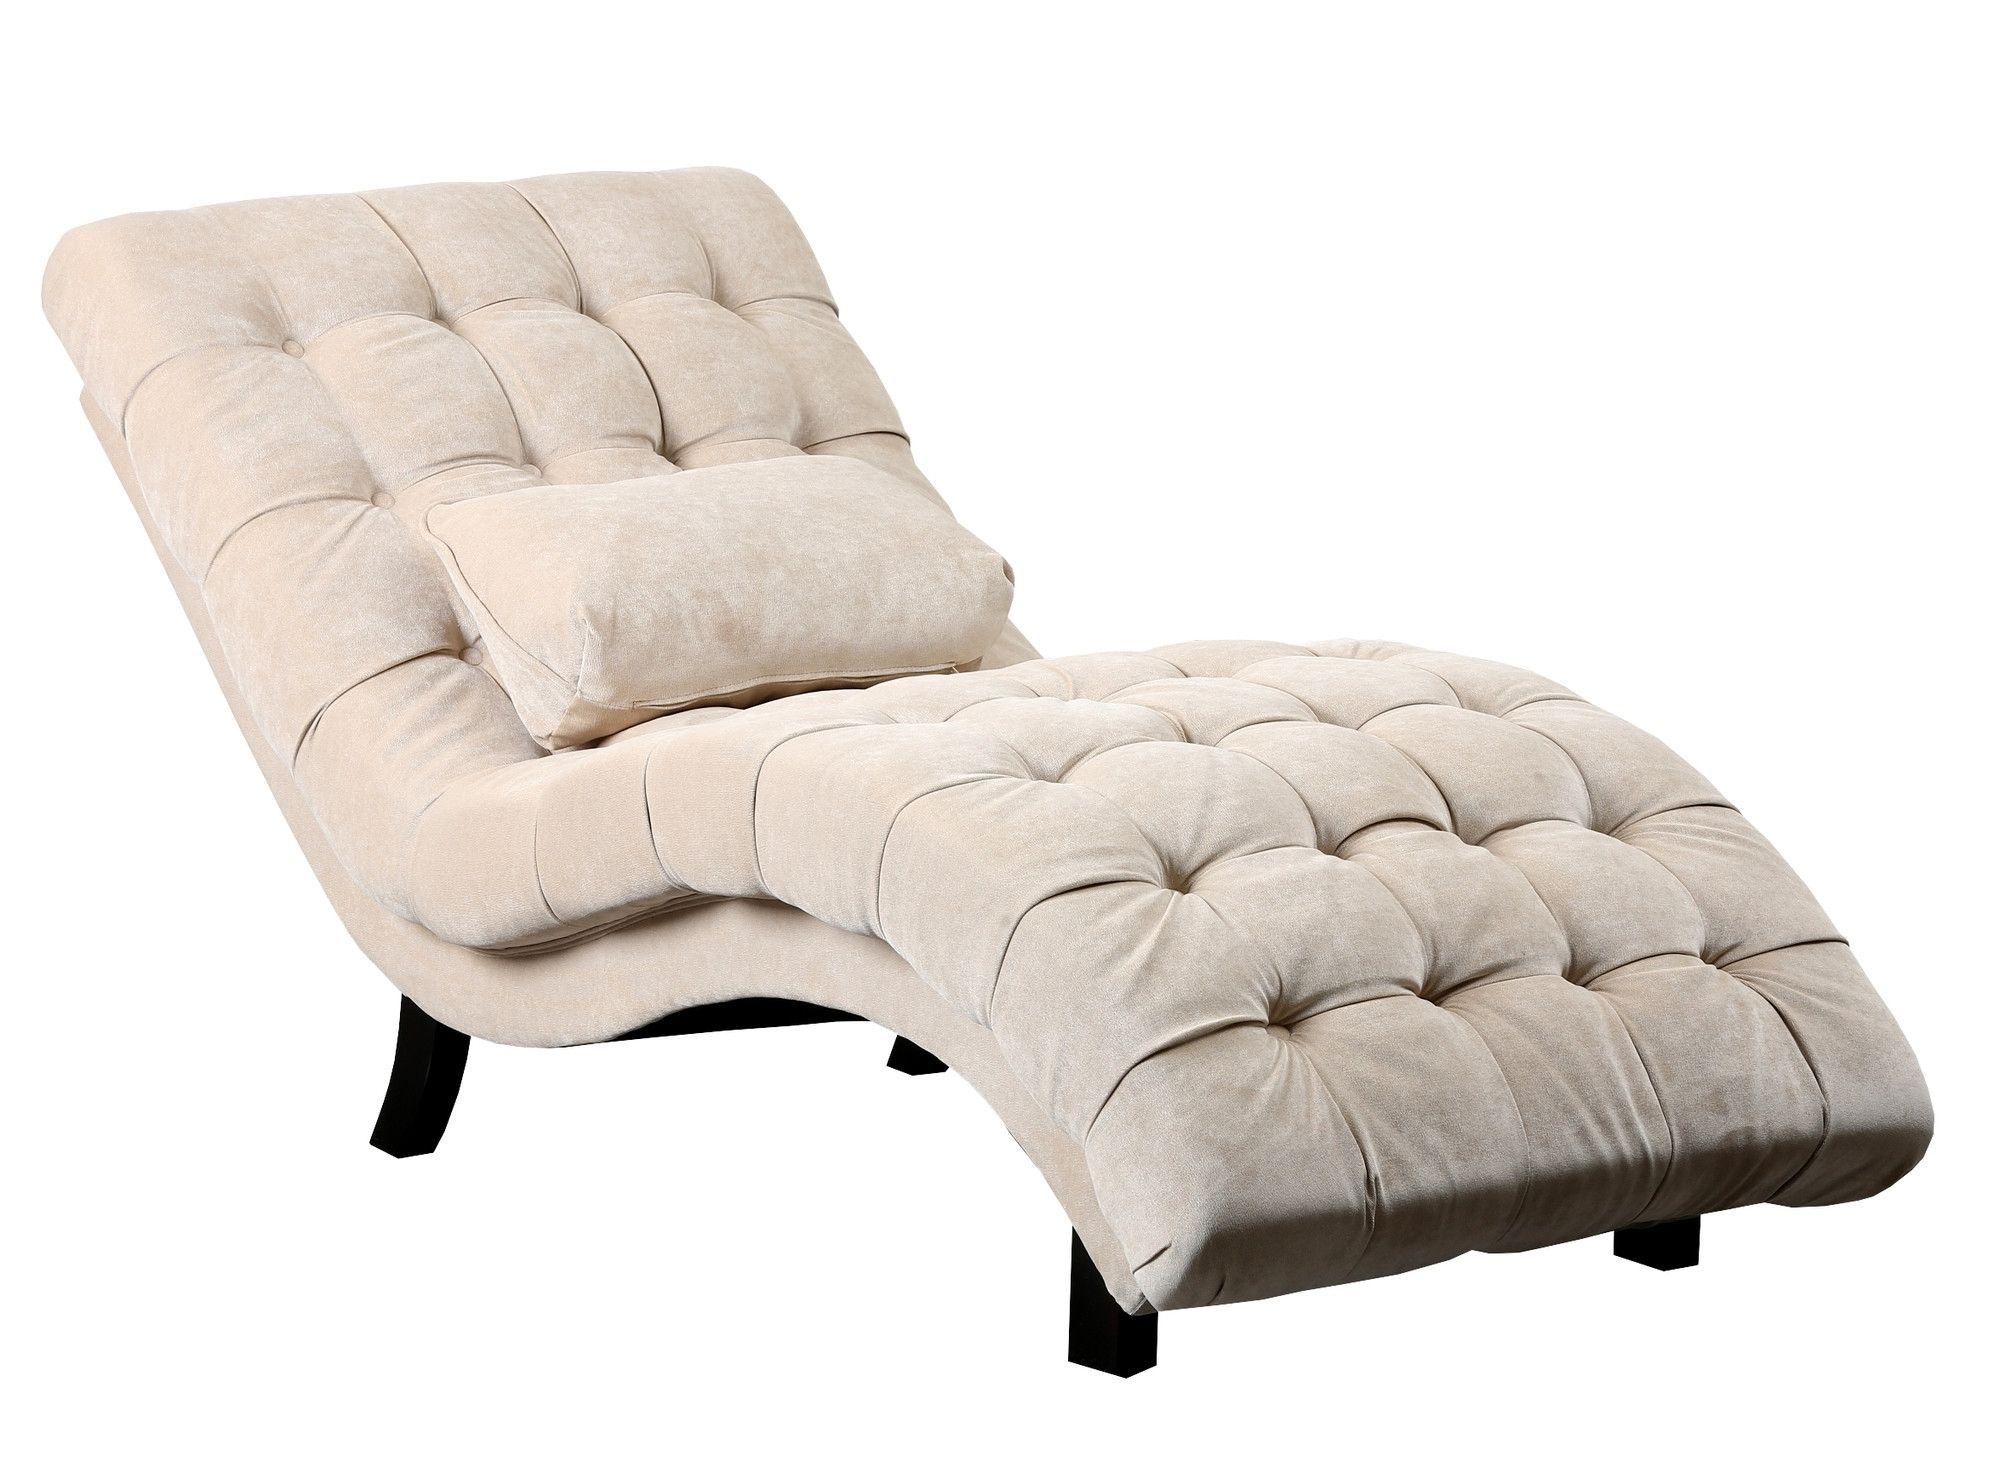 Most Recent Teenage Chaise Lounges In Bedroom Chaise Lounge Chairs Wayfair Ikea Of With For Teens (View 8 of 15)